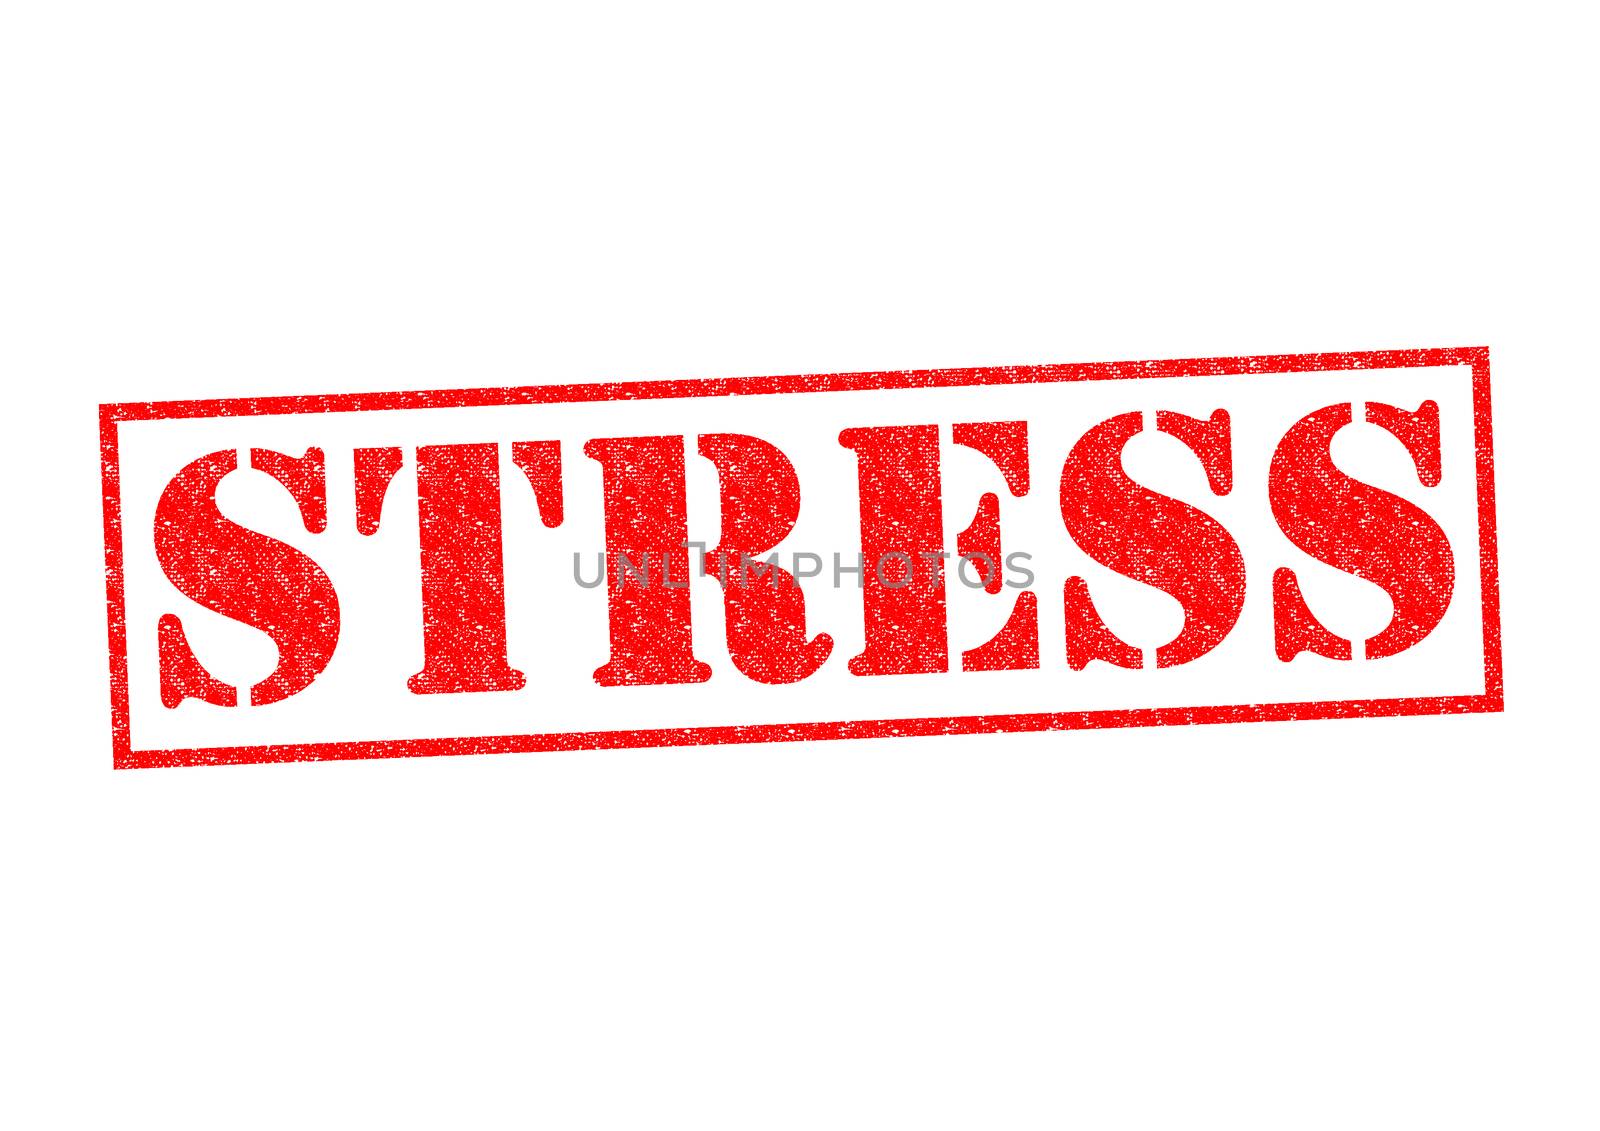 STRESS Rubber Stamp over a white background.